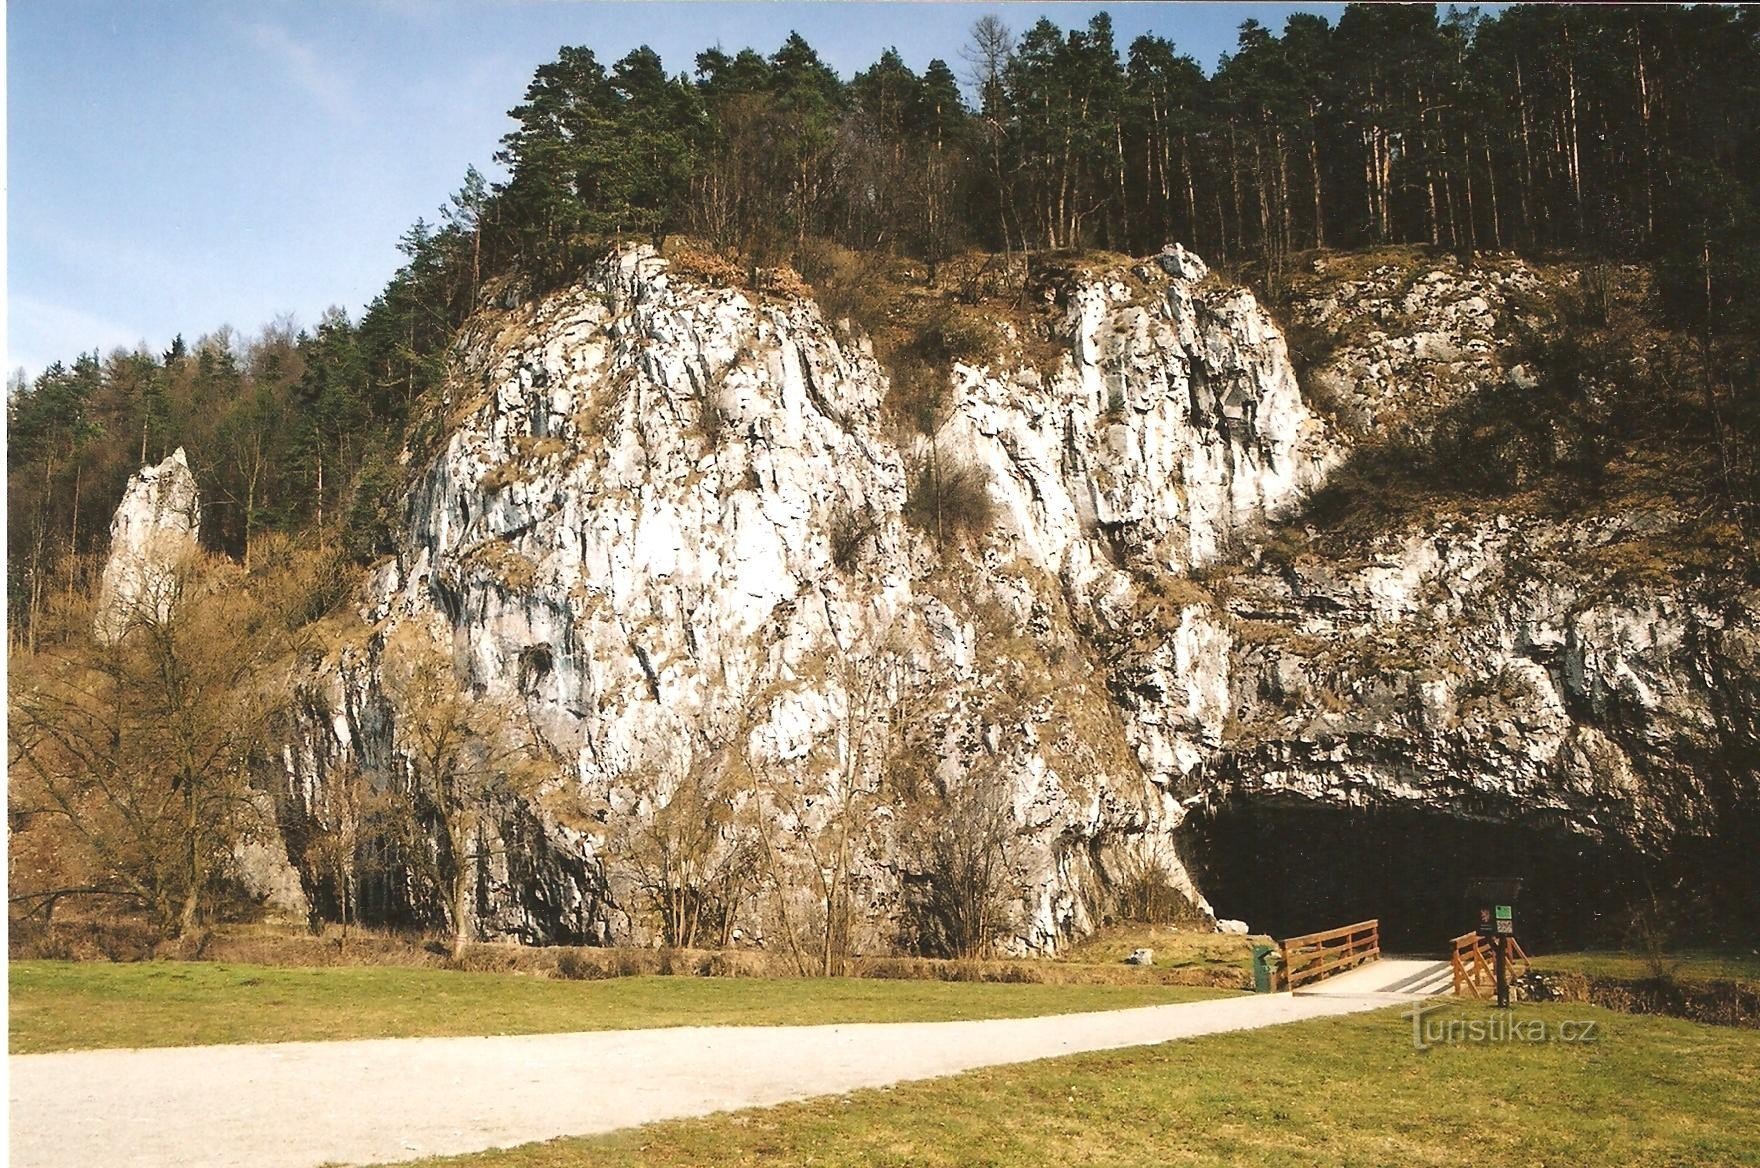 Rock wall above the entrance to the Sloup Caves